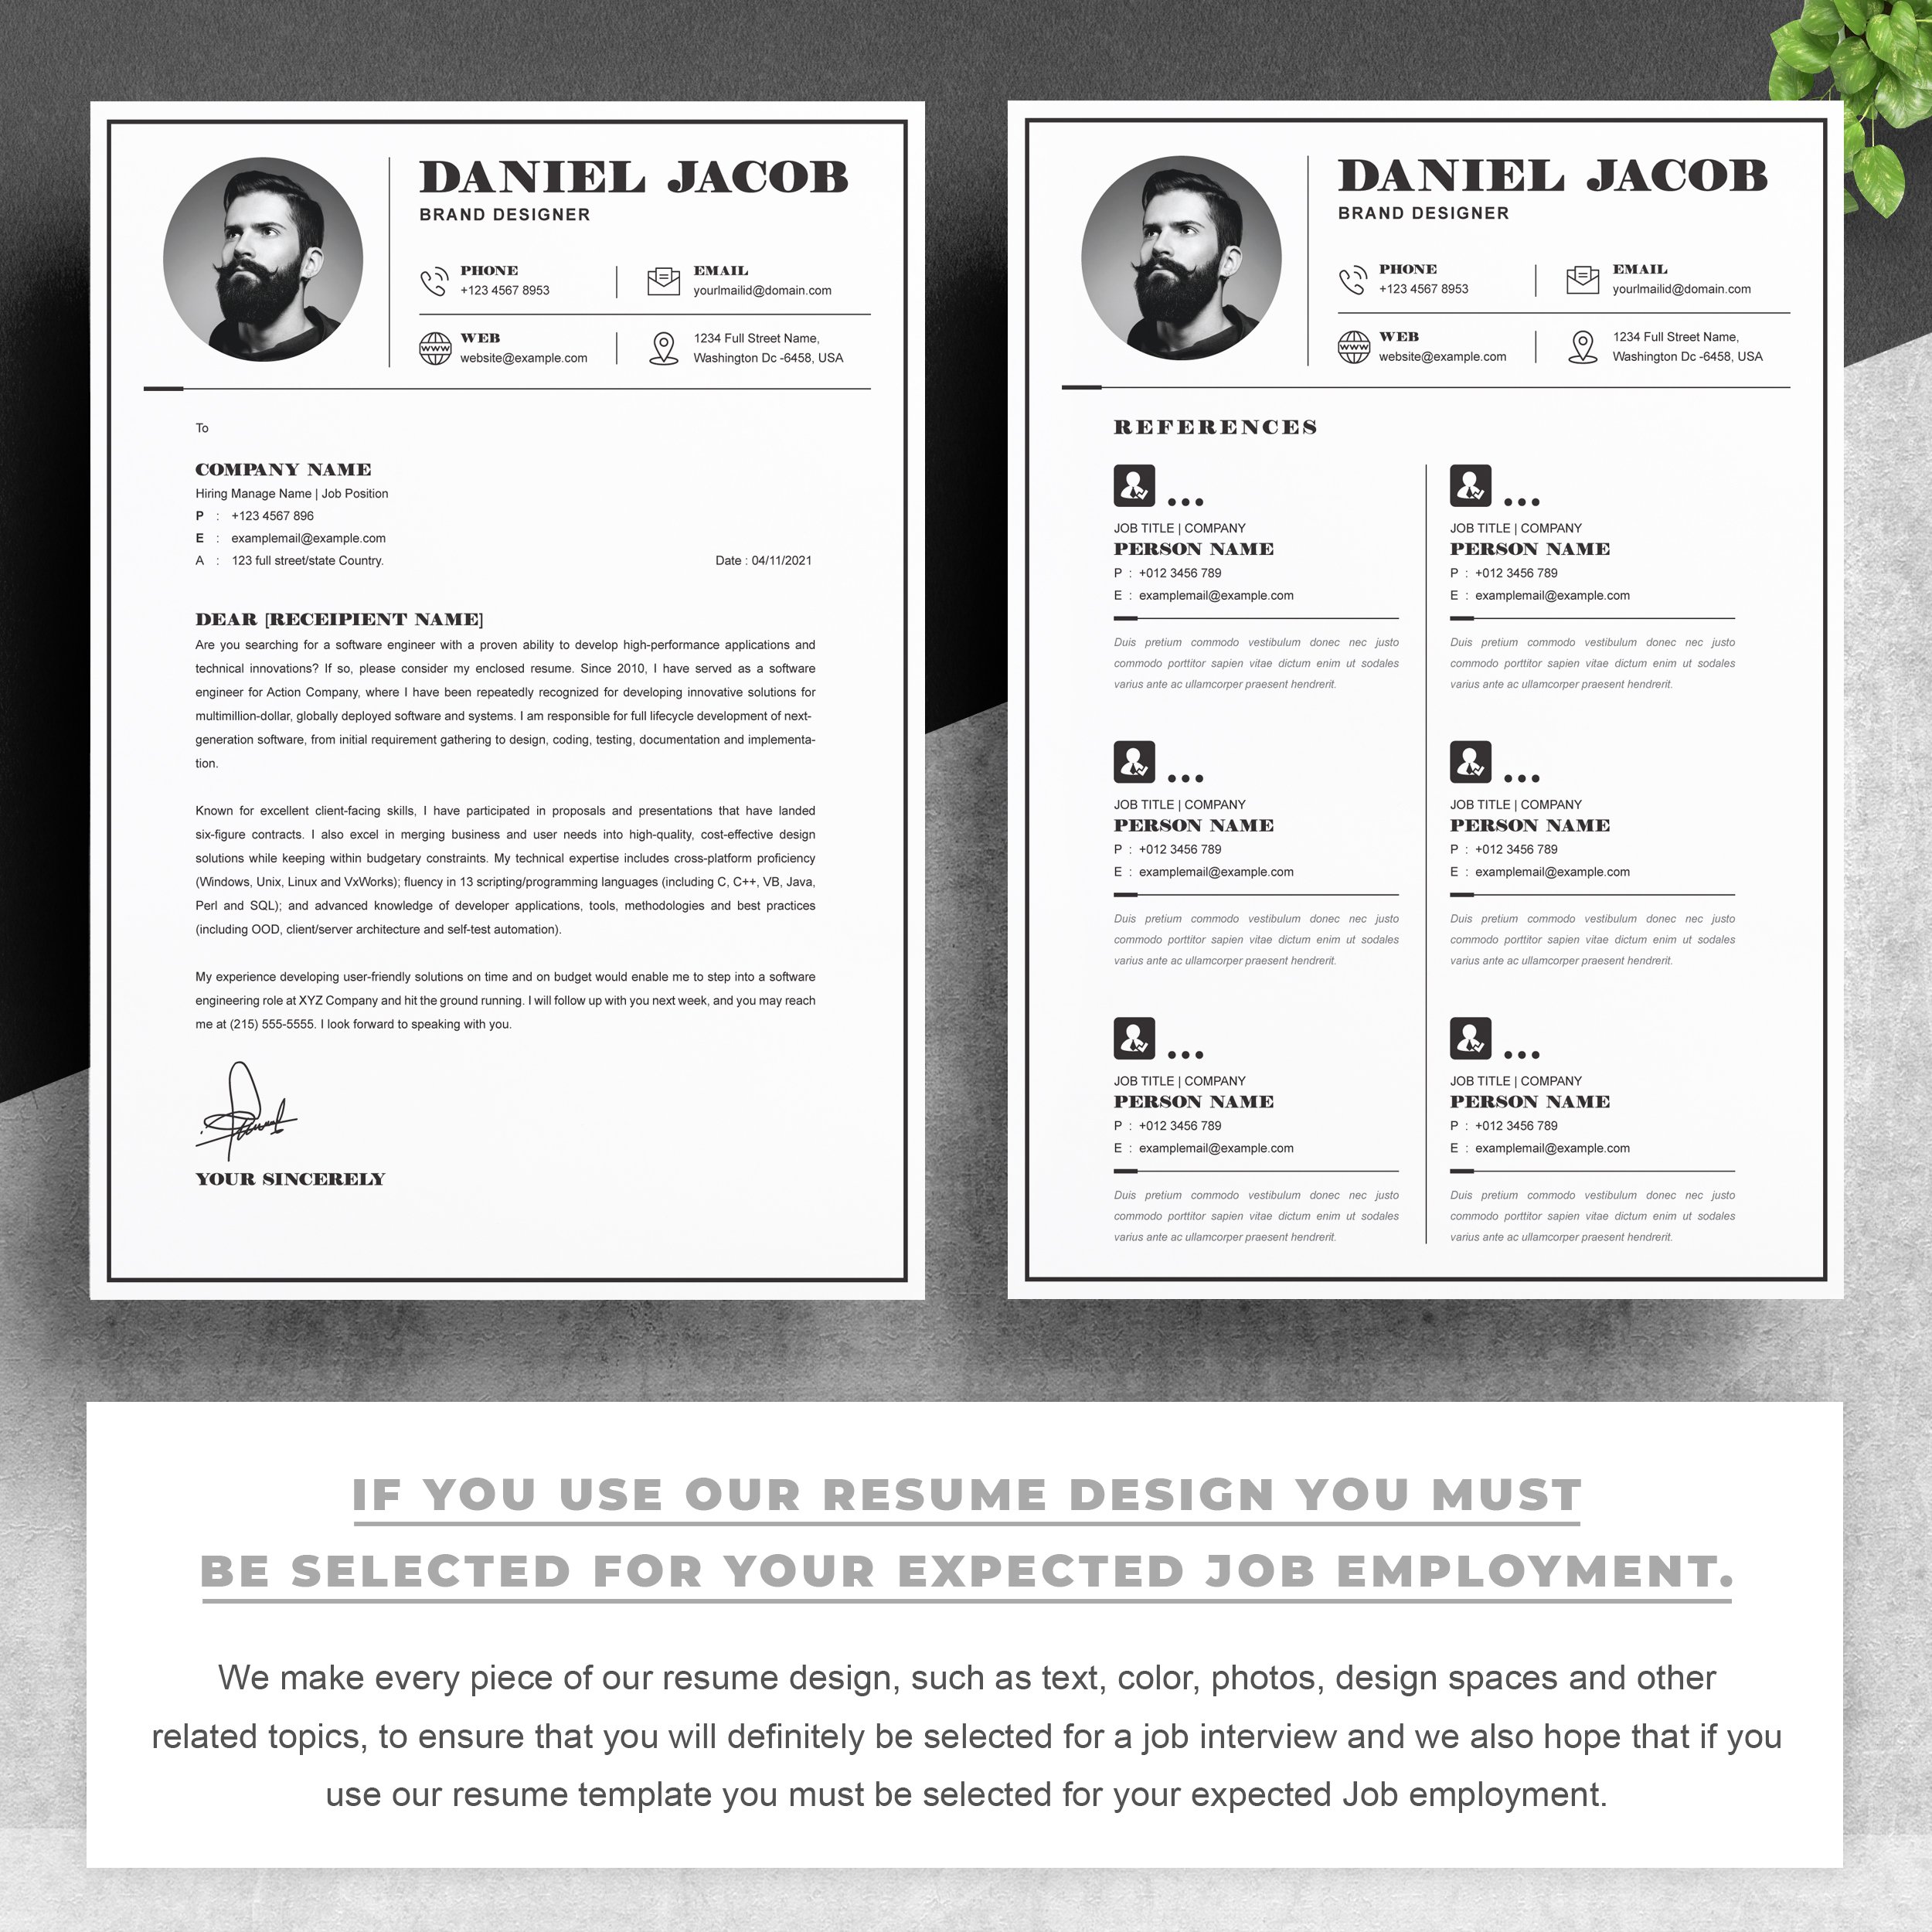 03 2 pages free resume design template copy 159